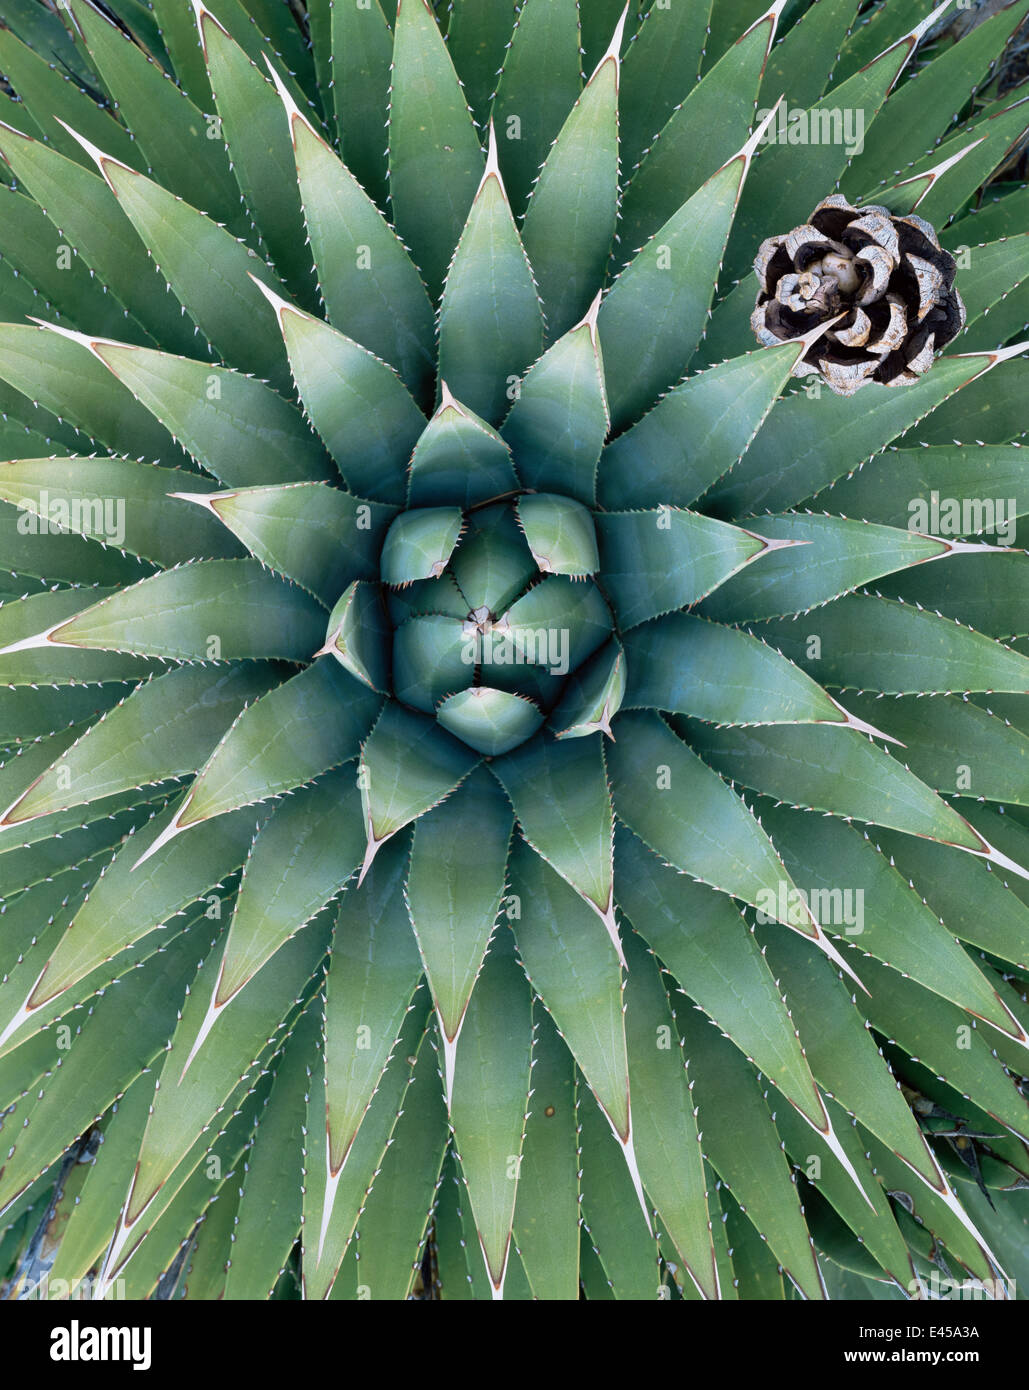 Looking down into the leaves of an Agave plant {Agave utahensis} with Pinyon pine cone {Pinus edulis}, Grand Canyon-Parashant National Monument, Arizona, USA Stock Photo